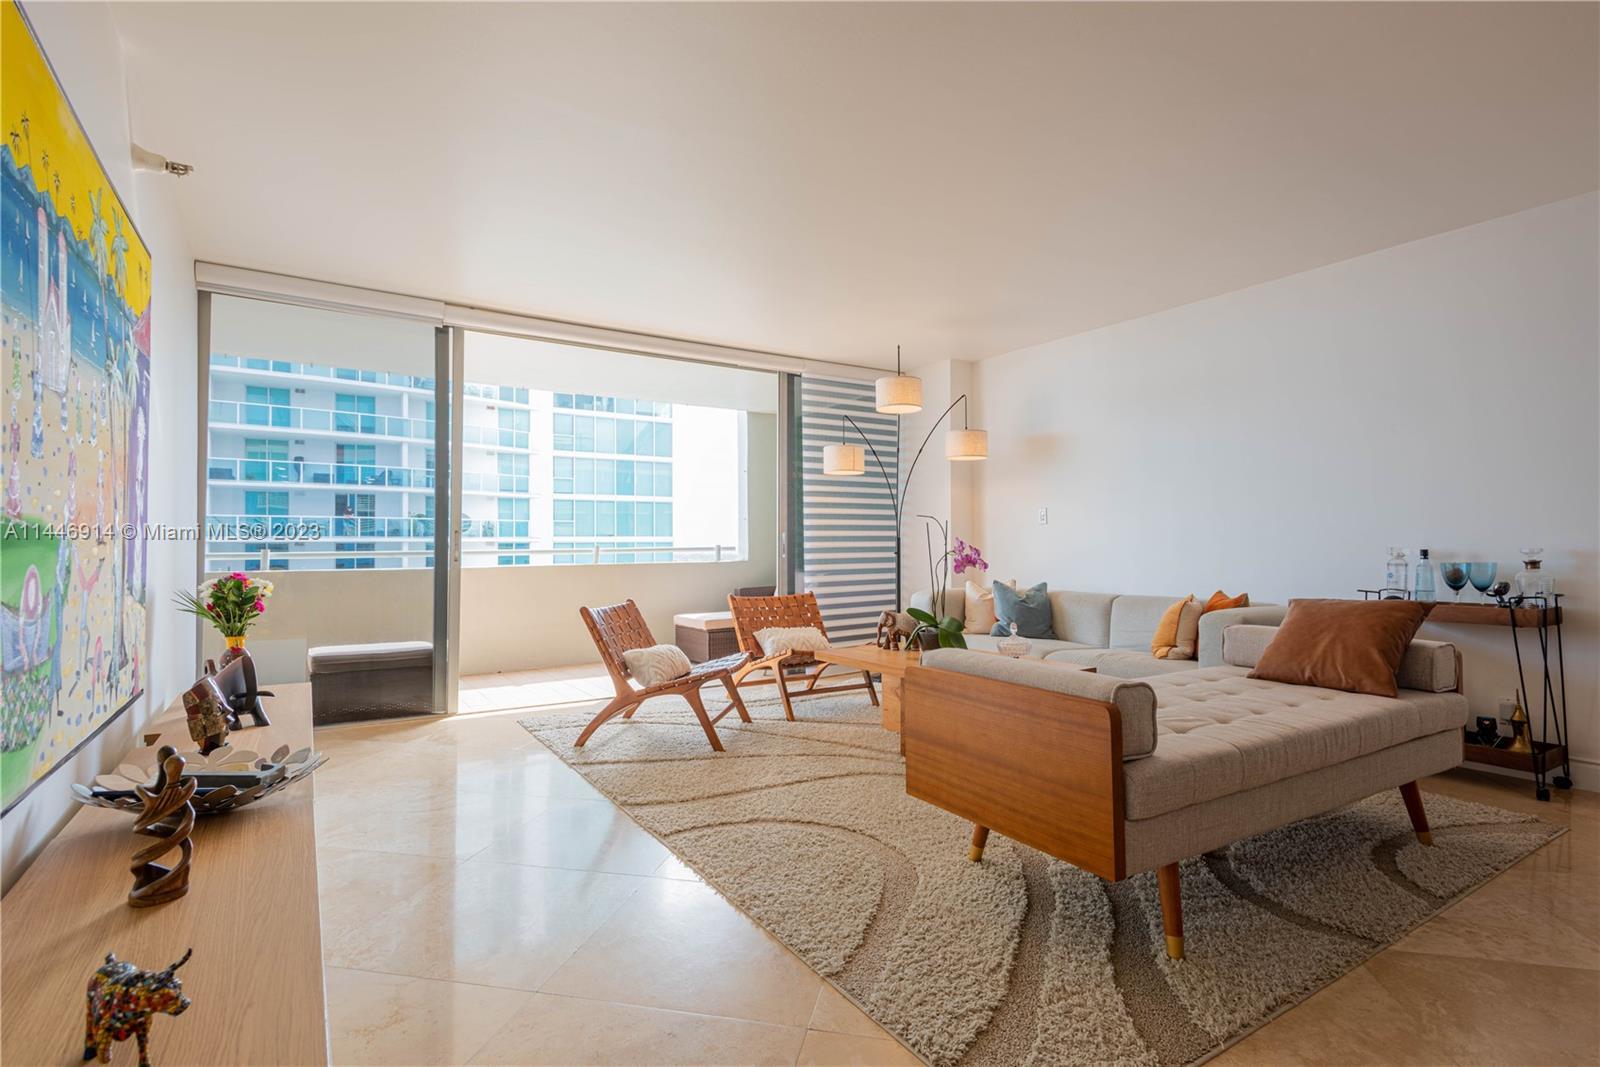 Fully renovated 3-bedroom, 2.5-bathroom on most desirable location at Brickell. It provides an excep